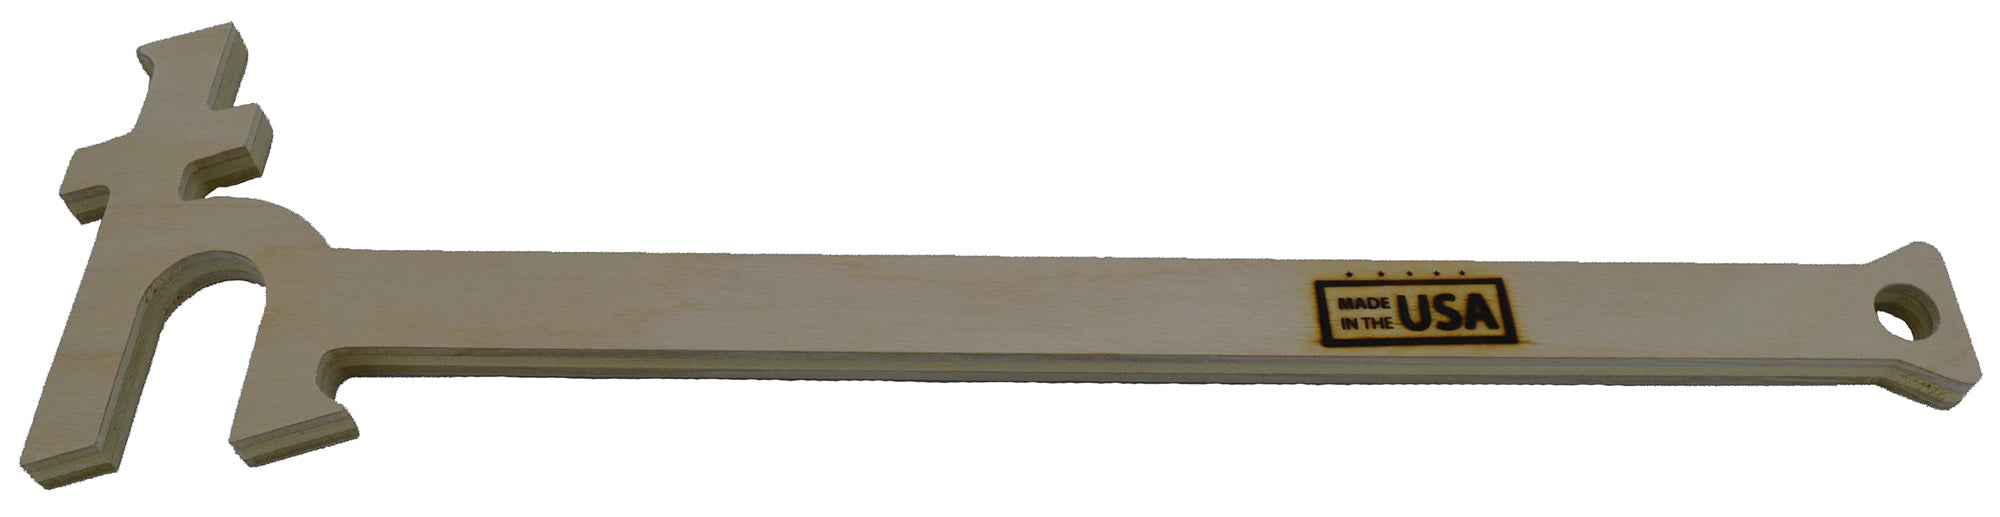 h-BAR Oven Rack Push Puller for Baking, Made in America 17" L x 4.75" H x 0.5" W, unfinished American Birch Plywood